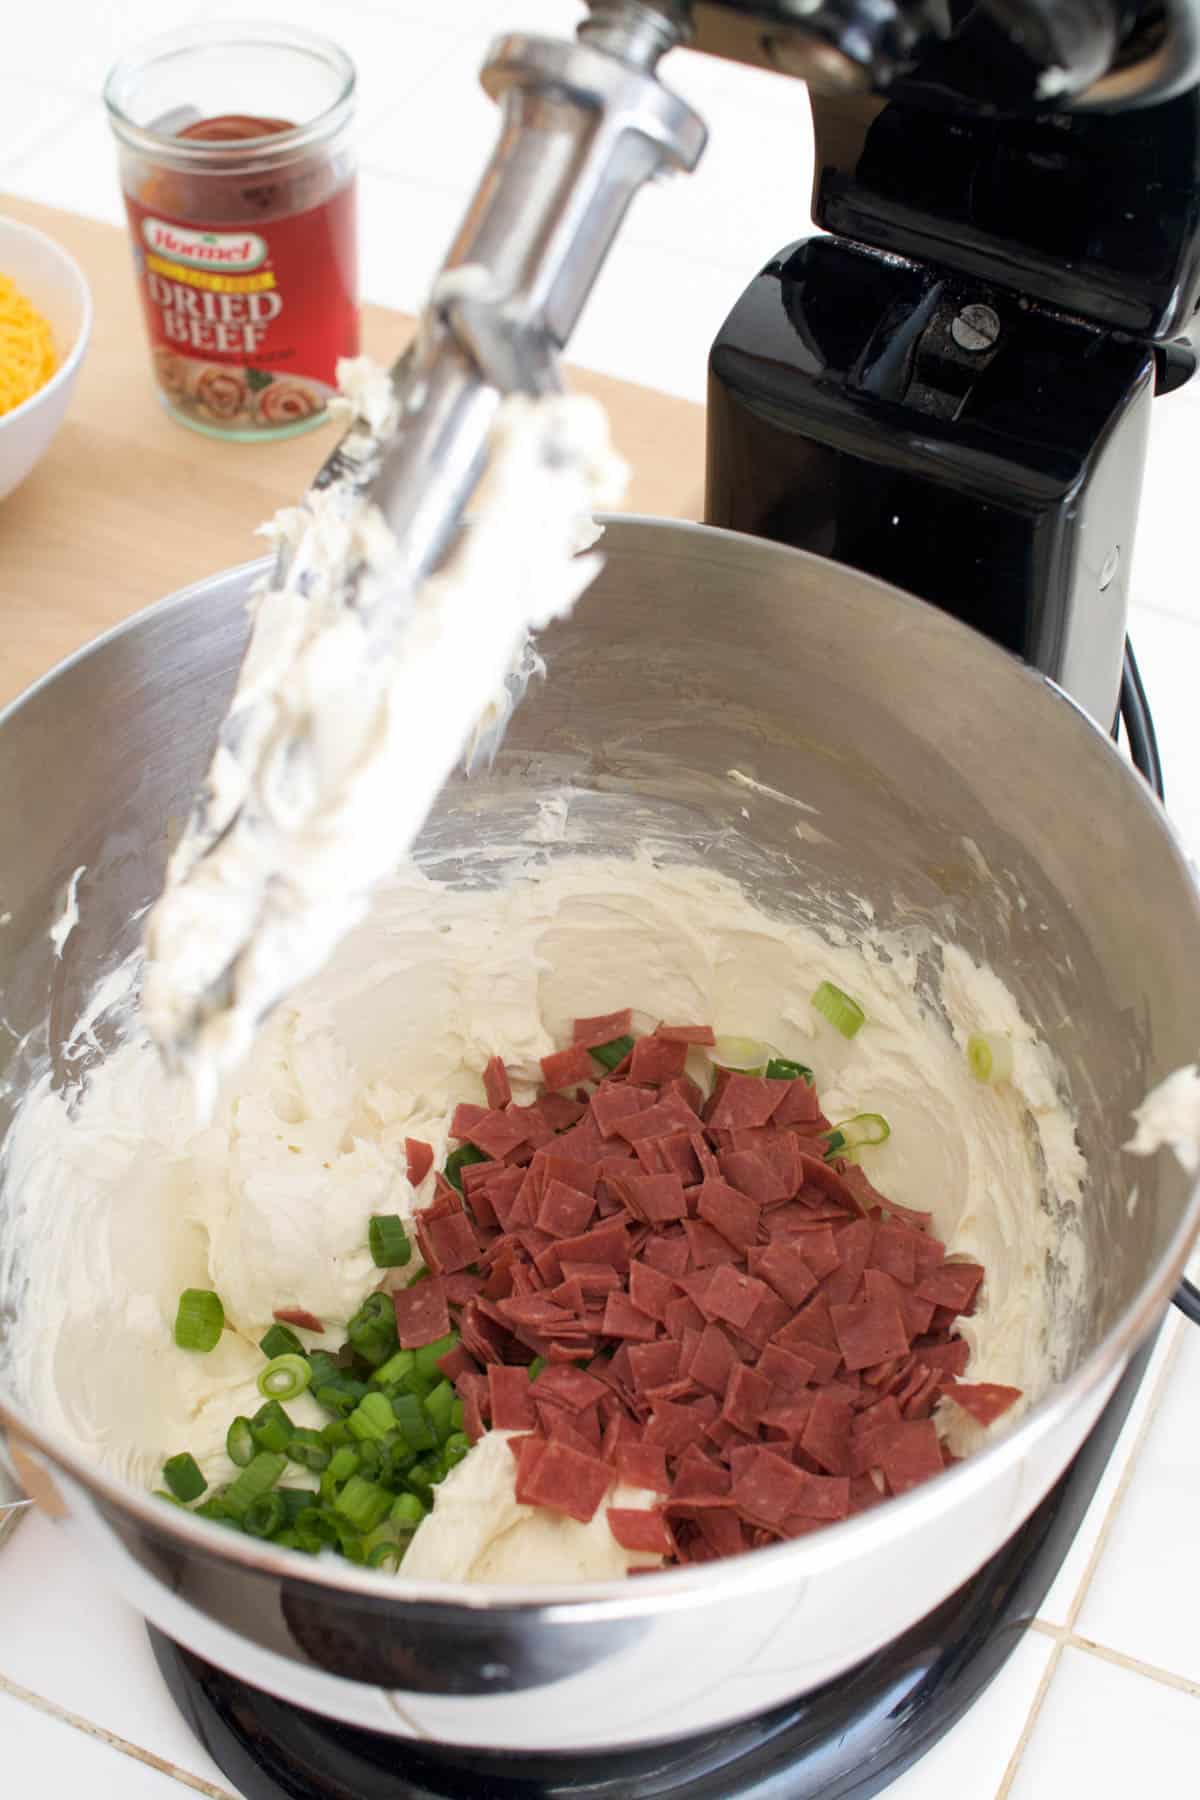 Stand mixer with cream cheese and dried beef with green onions for an appetizer.